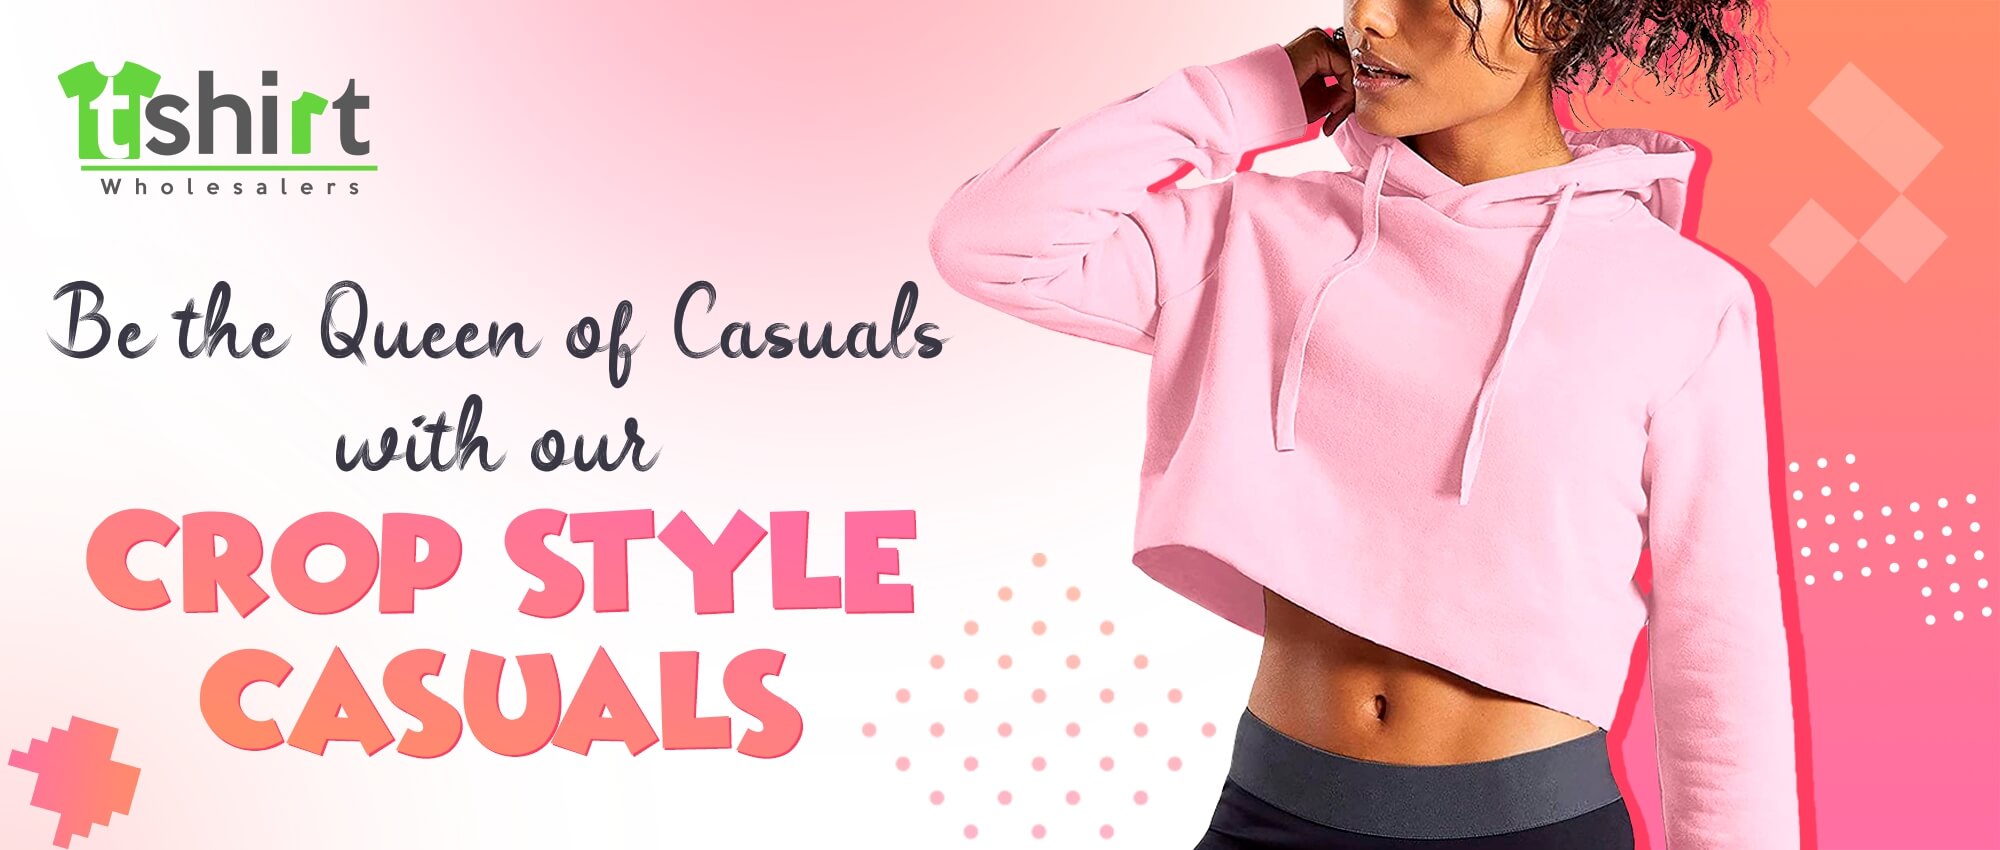 BE THE QUEEN OF CASUALS WITH OUR CROP-STYLE CASUALS